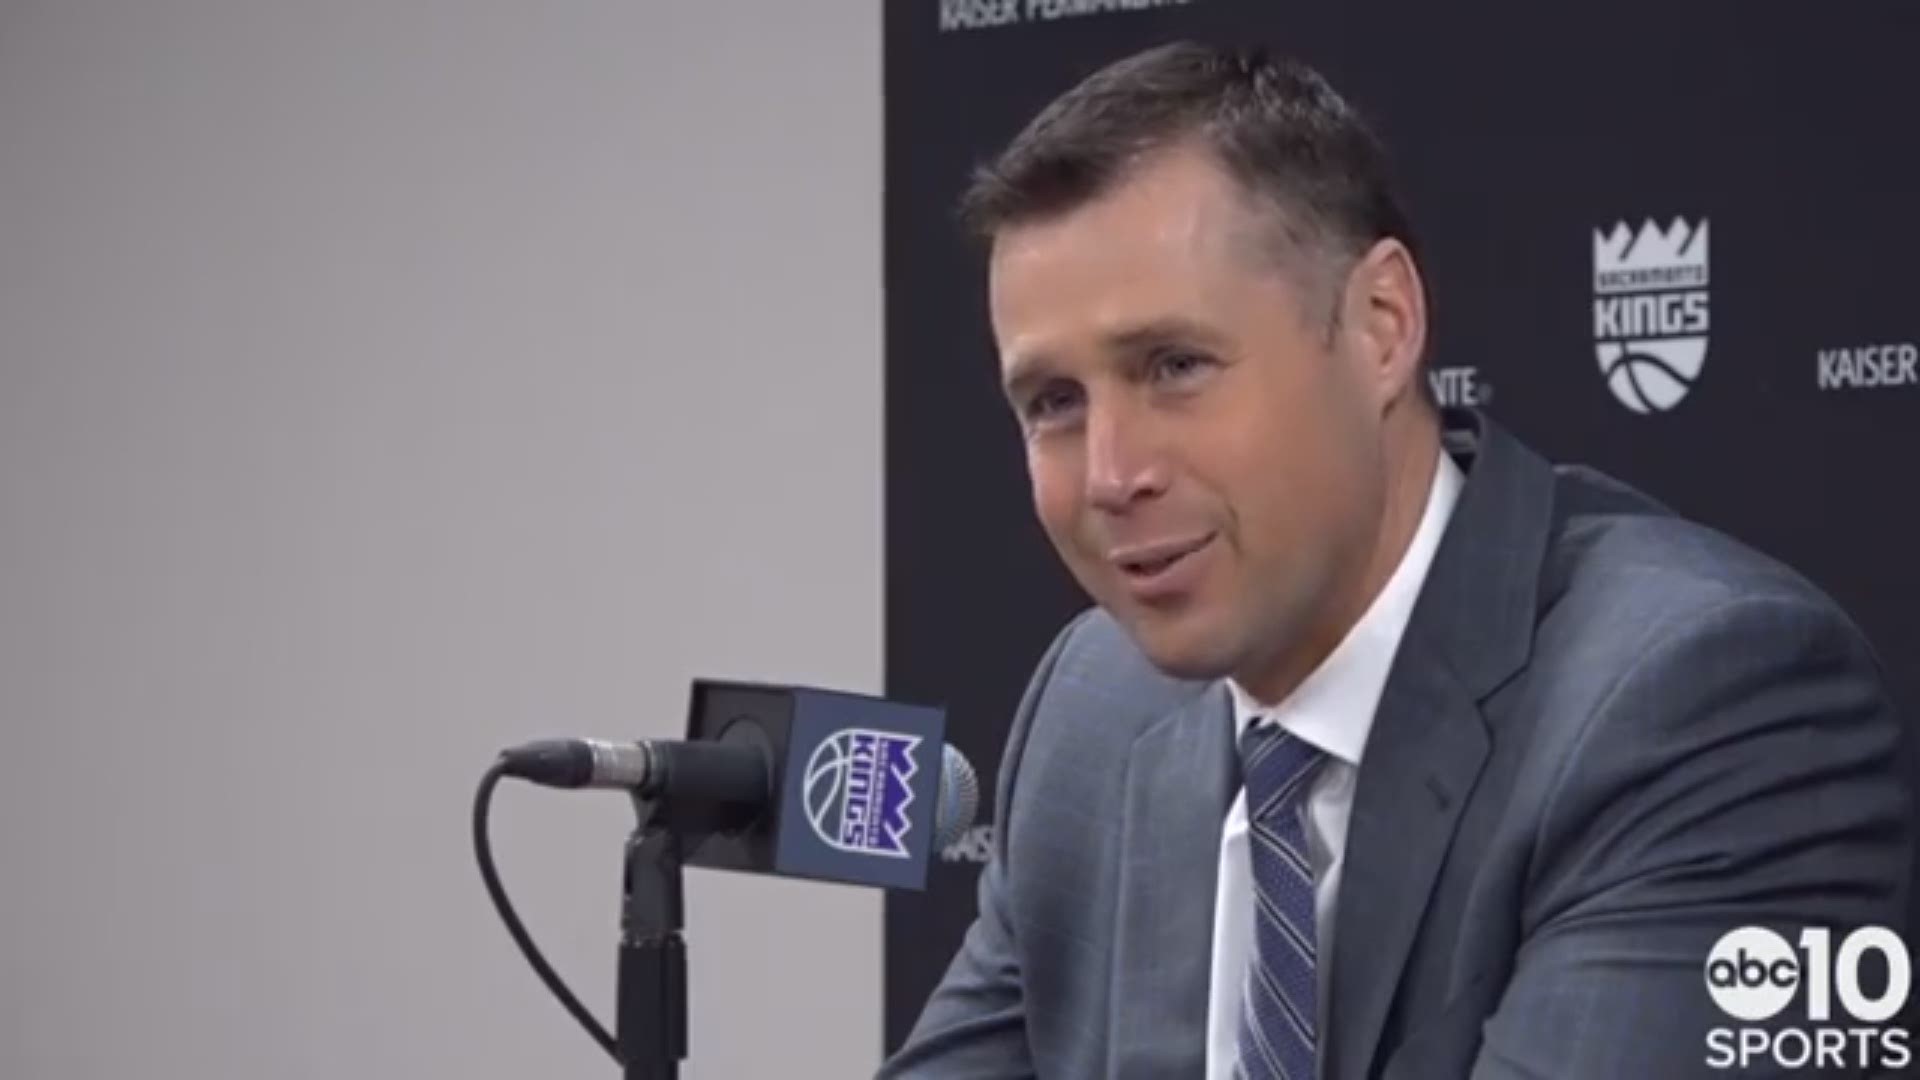 Kings coach Dave Joerger discusses Saturday's victory over the Phoenix Suns, Buddy Hield breaking Peja Stoakovic's three-point franchise record, the effort from Nemanja Bjelica who had a career-high 17 rebounds and going 3-1 on the homestand.